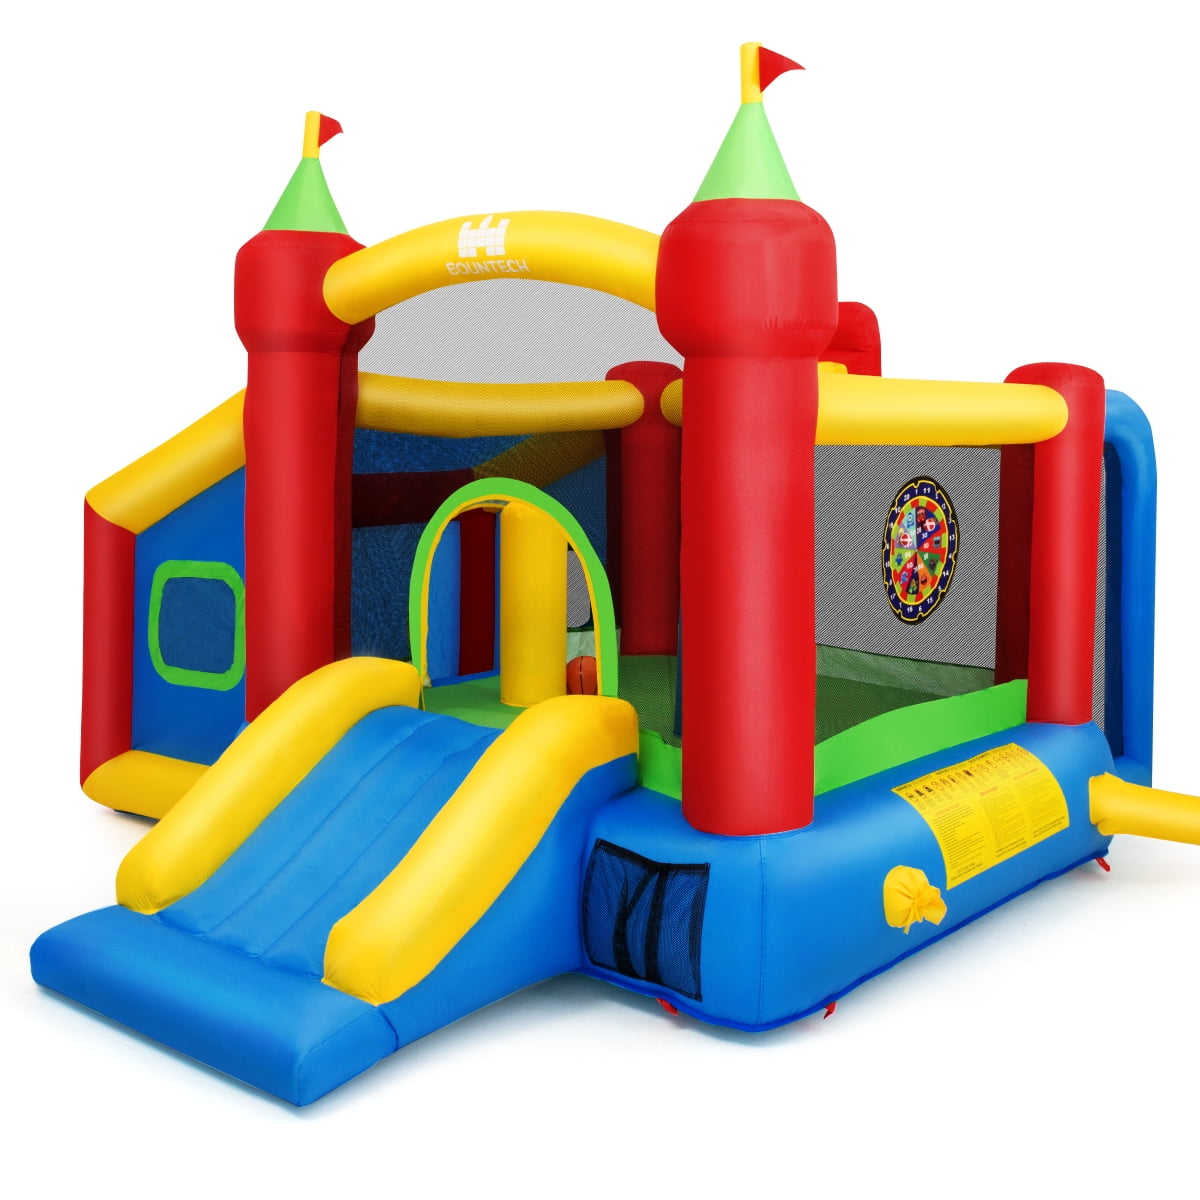 Details about   Banzai Slide n' Score Inflatable Bounce House 